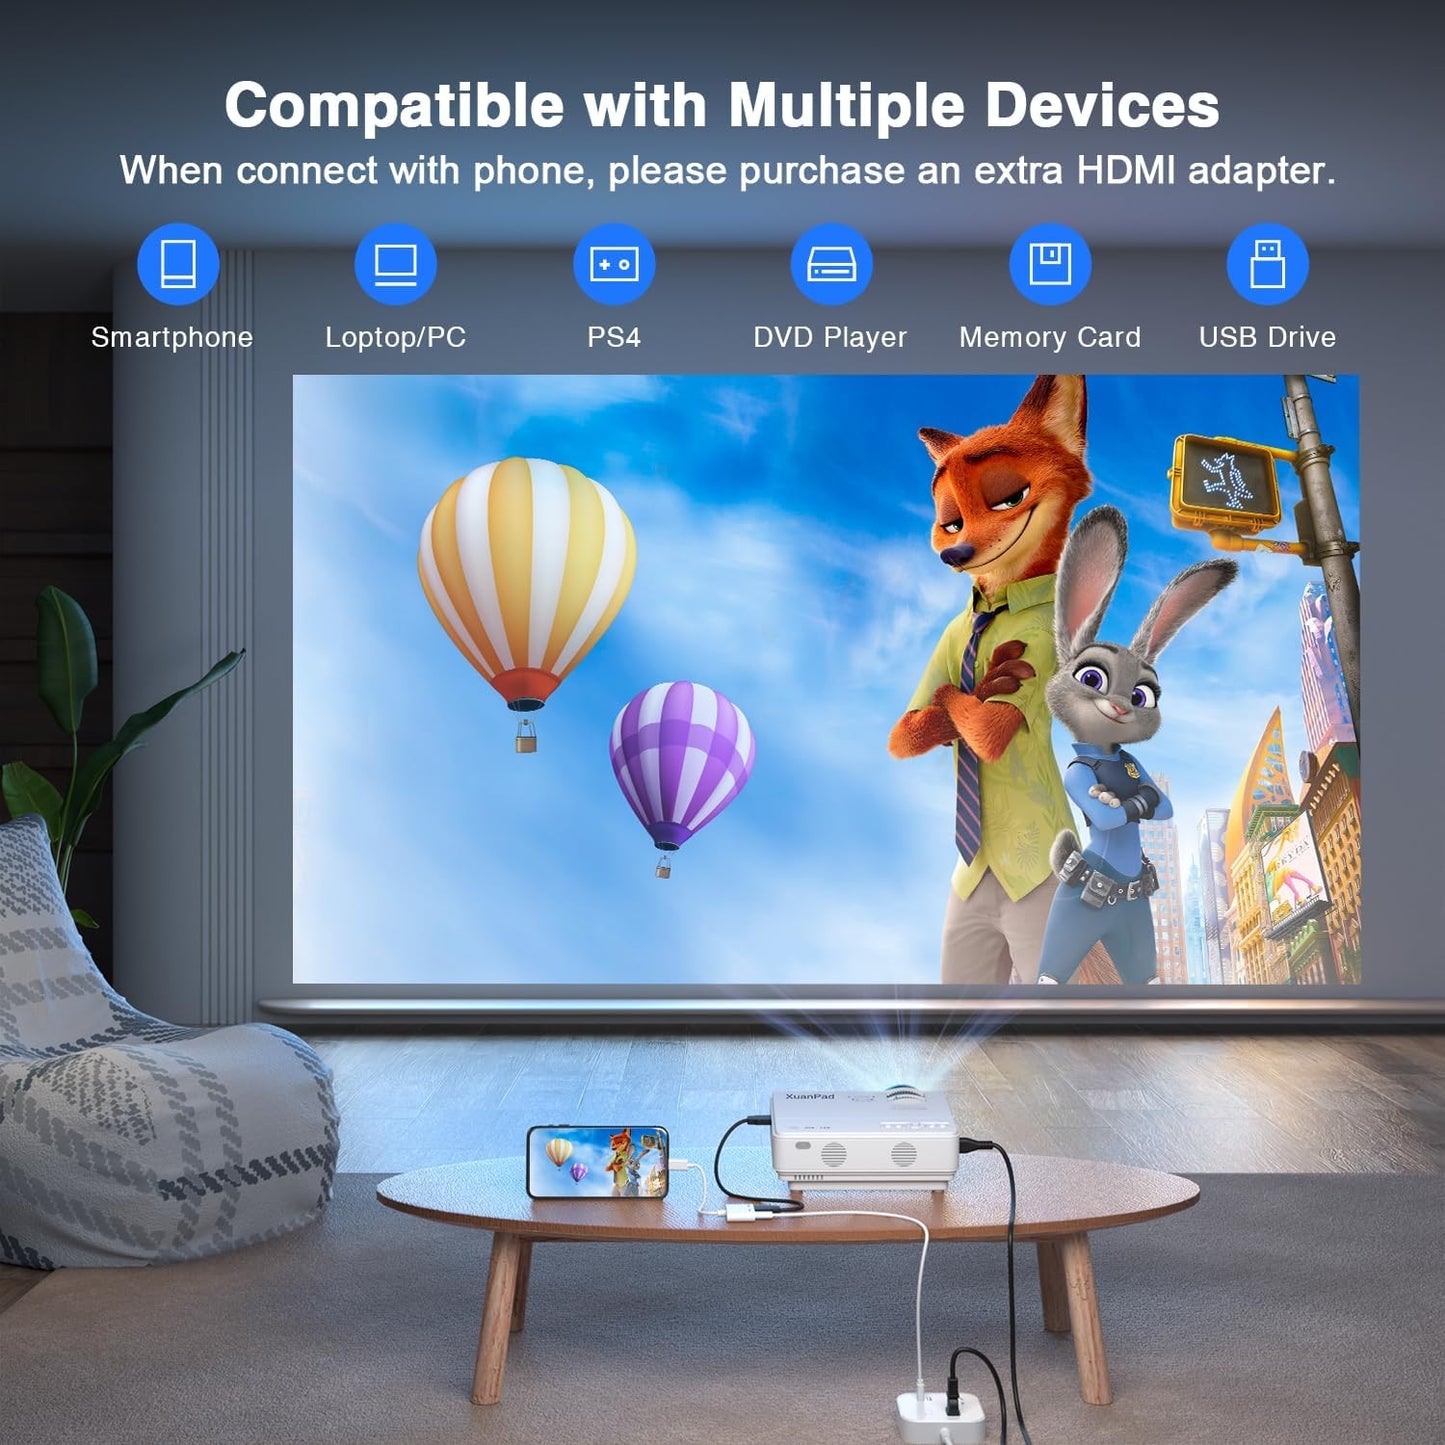 XuanPad Mini Projector, 2024 Upgraded WiFi Bluetooth Projector, Portable Projector HD 1080P Supported, Home Theater Video Projector Compatible with TV Stick/HDMI/USB/AV/Laptop/iPhone/Android